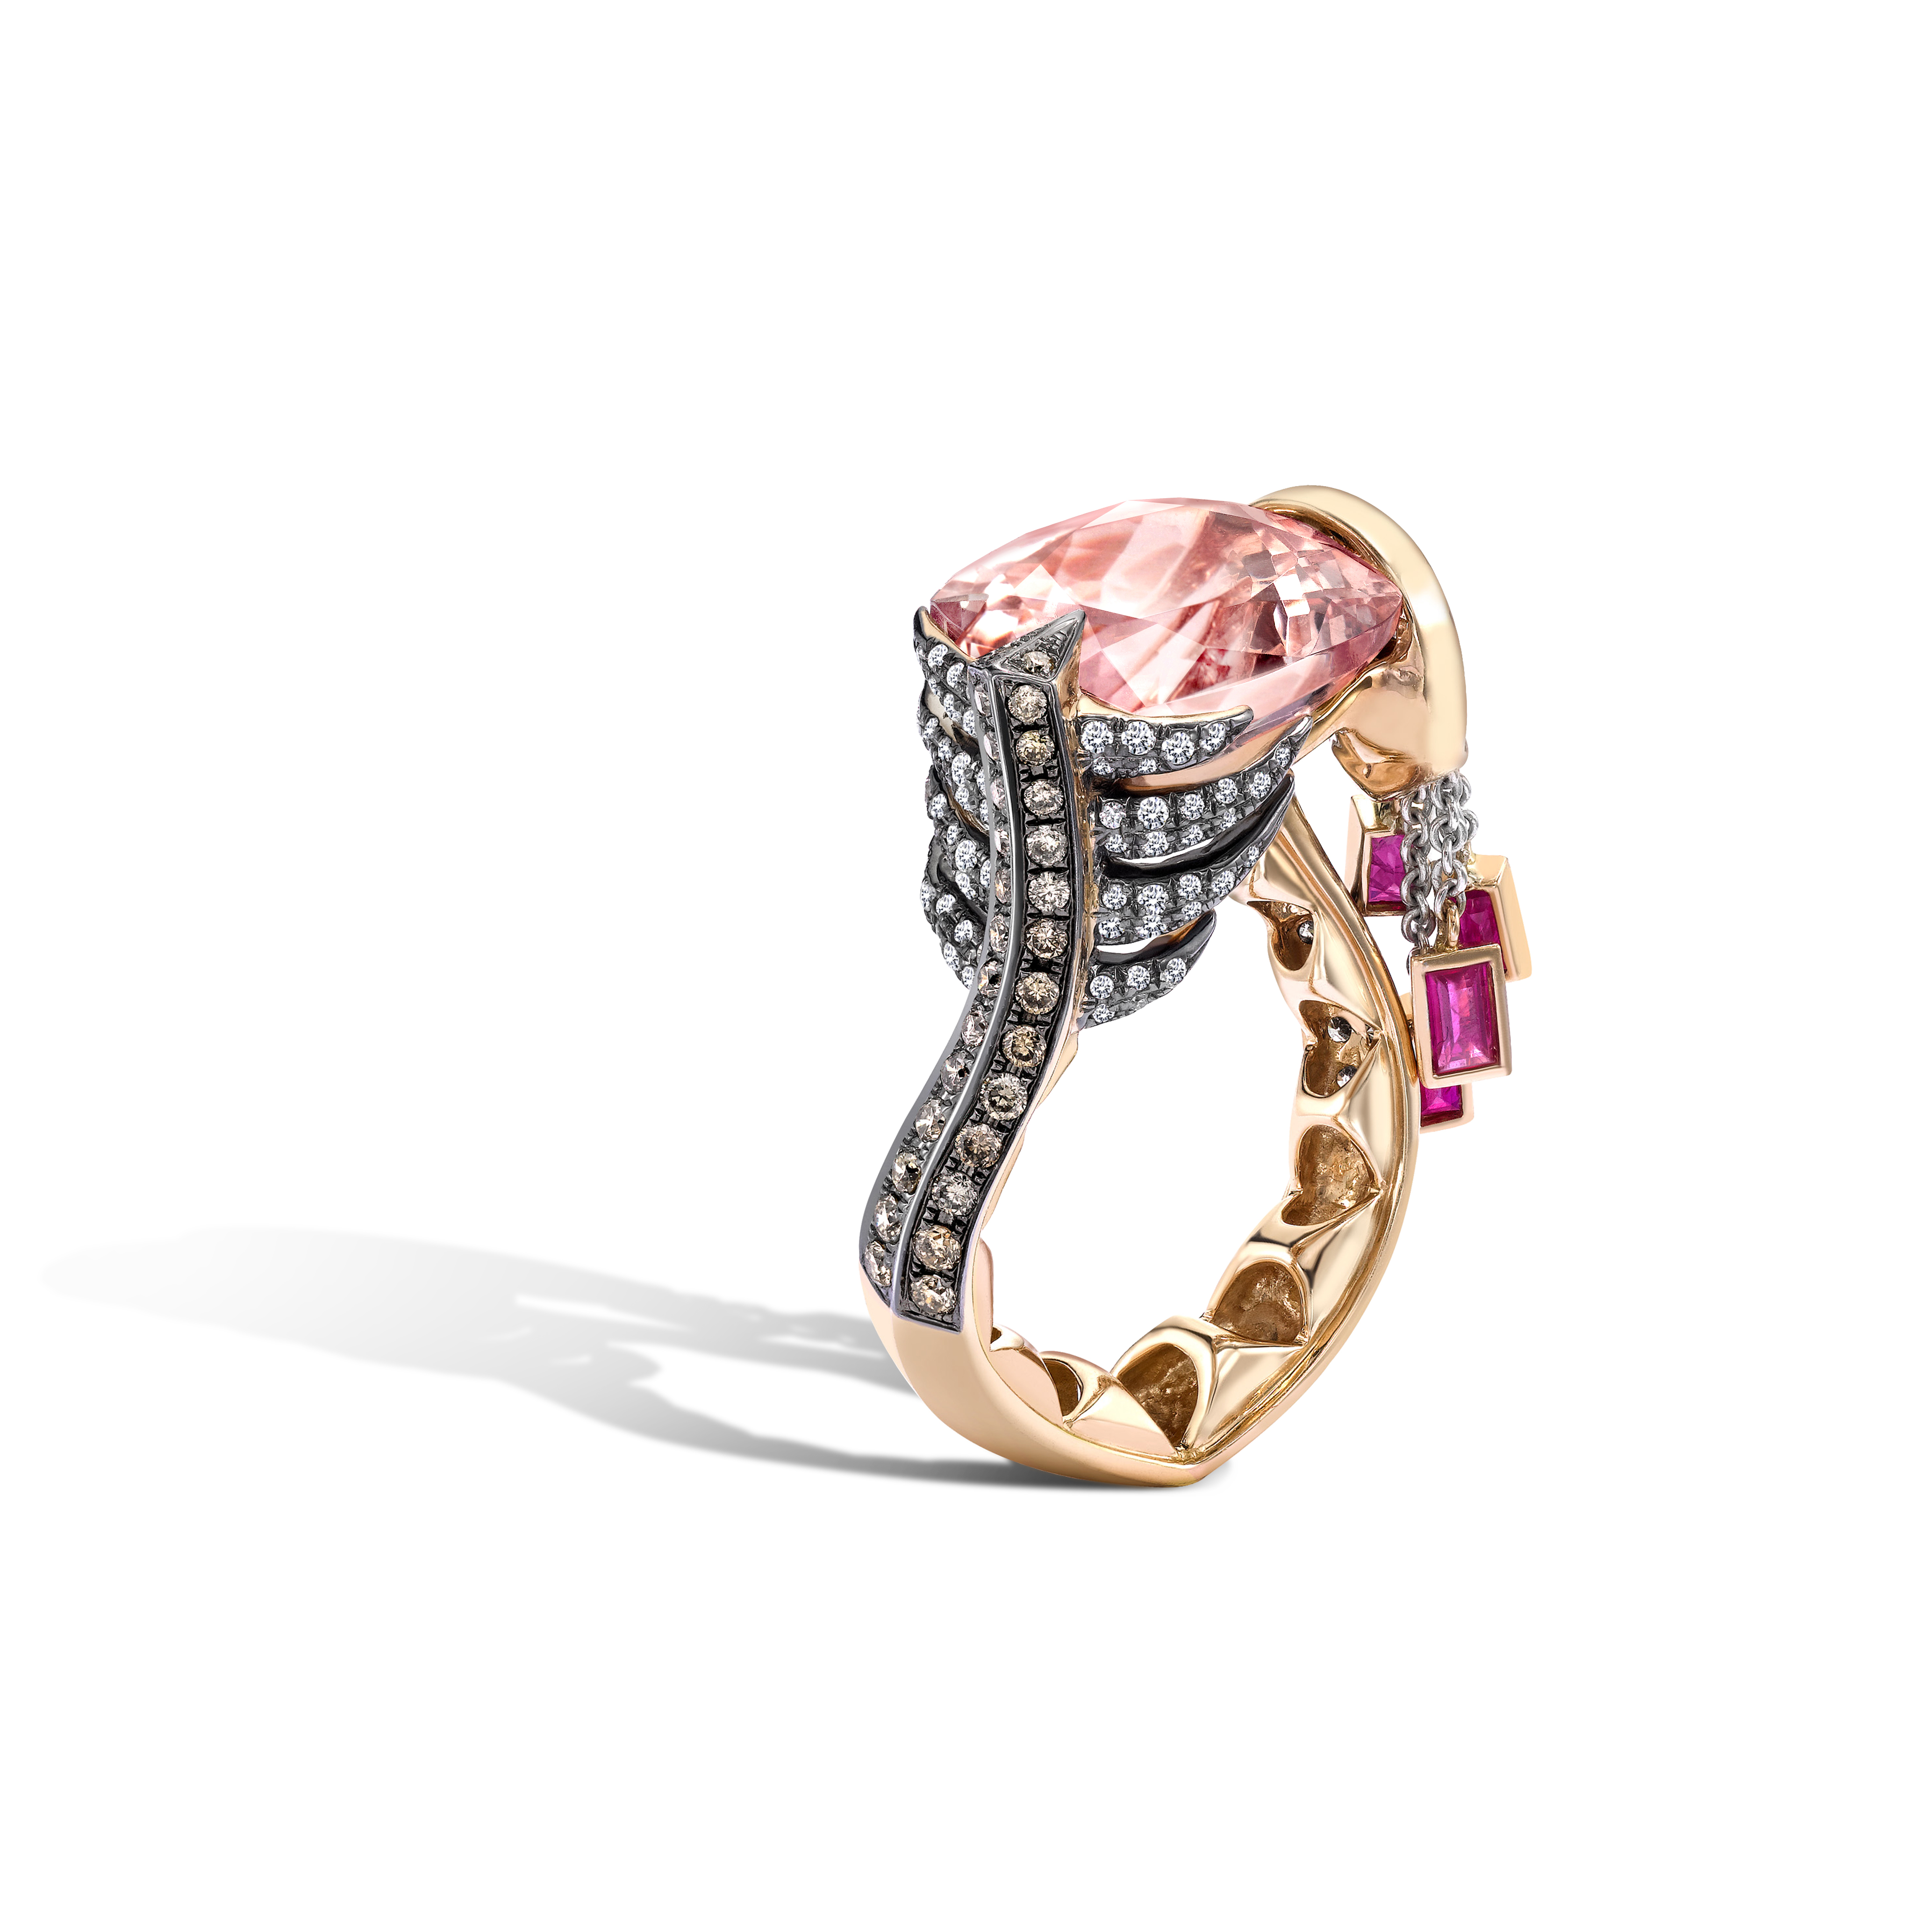 Leyla Abdollahi Kallirhoe ring mounted on rose and white gold with white and brown diamonds, rubies baguette and morganite cushion cut